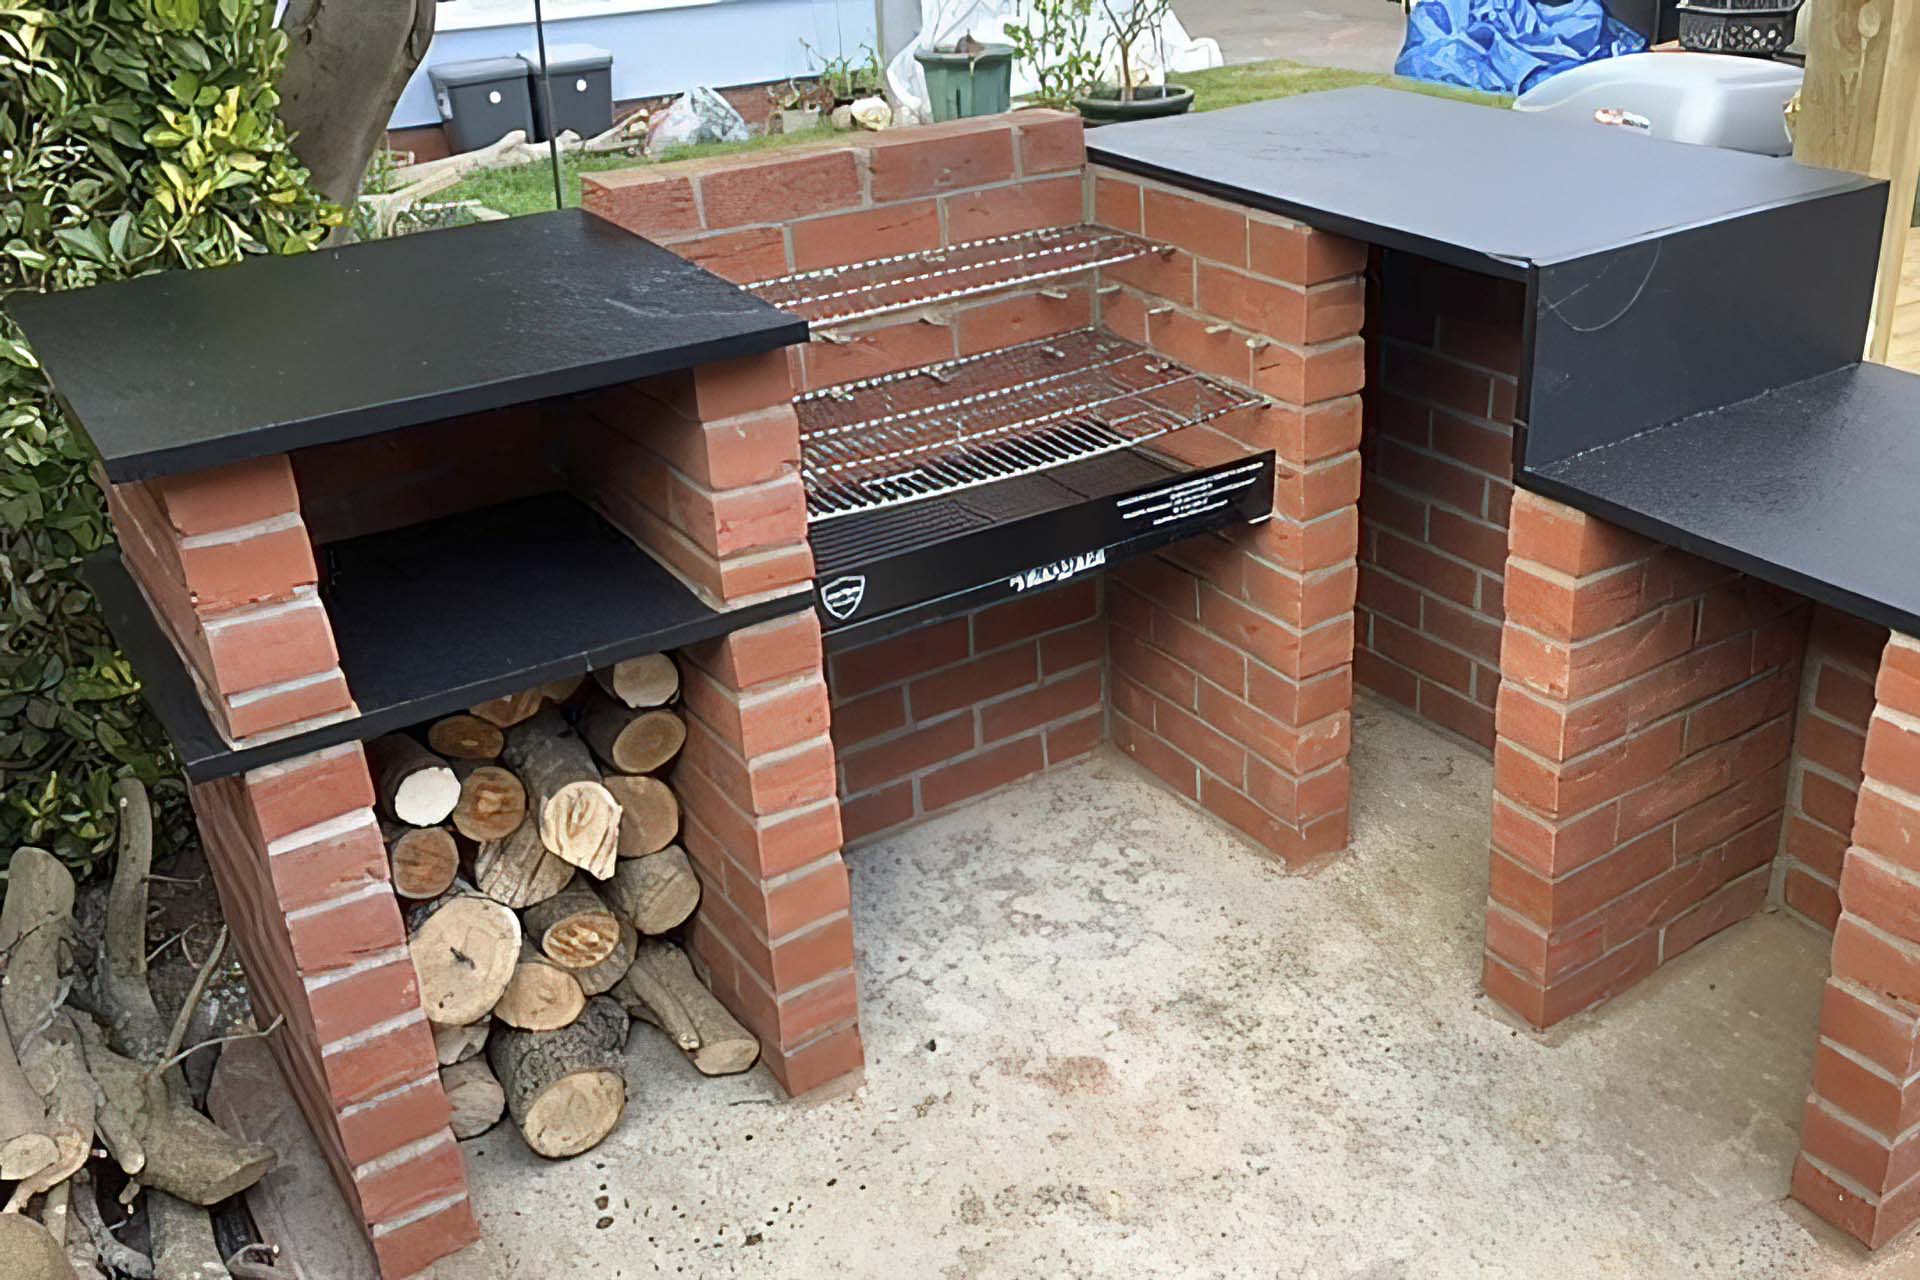 black knight barbecue with solid stone worktops a